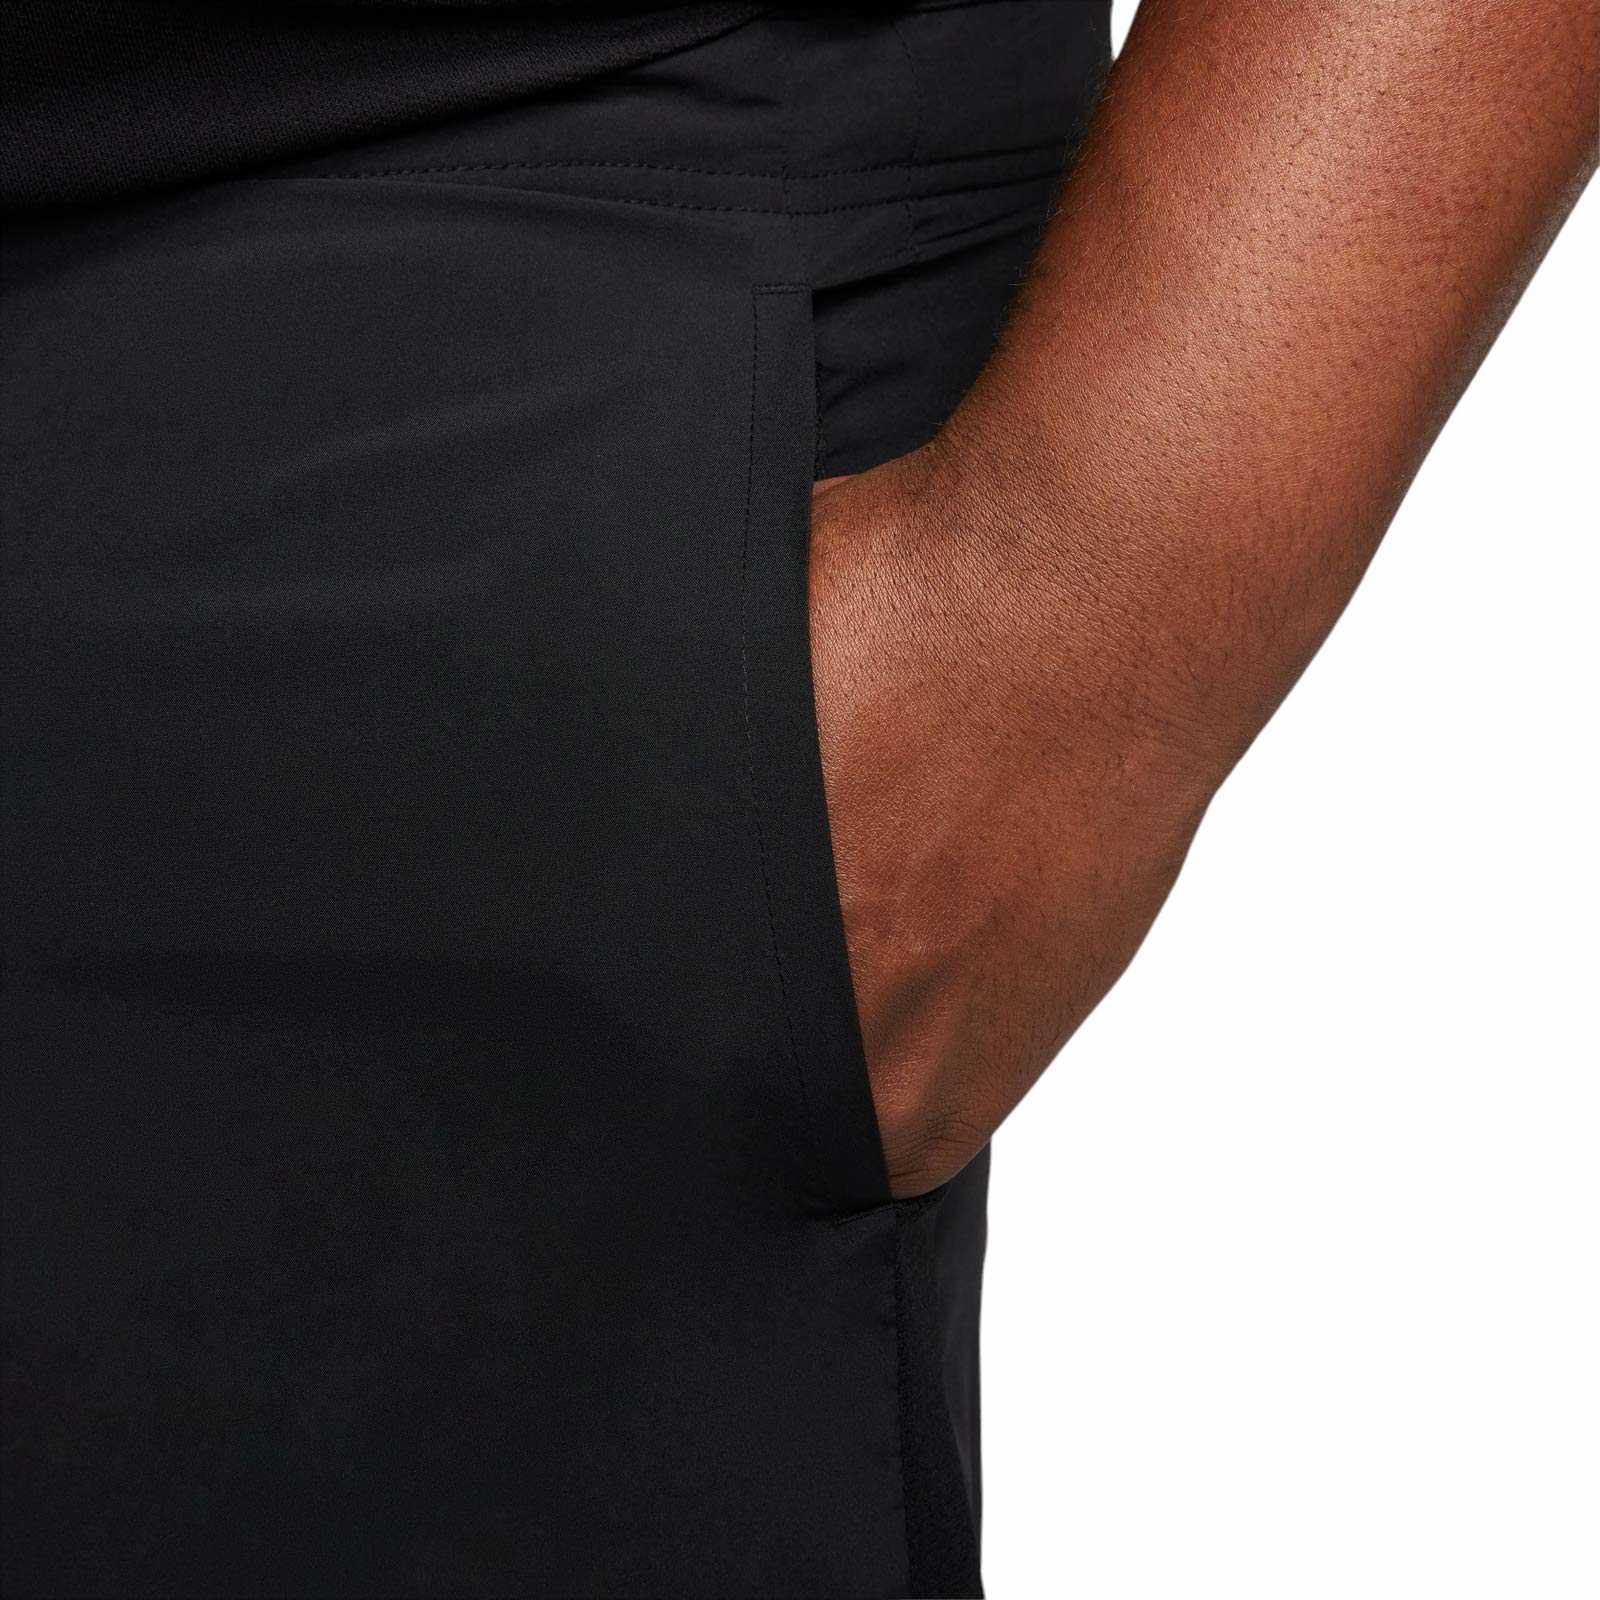 NIKE CHALLENGER MENS DRI-FIT 5" BRIEF-LINED RUNNING SHORTS